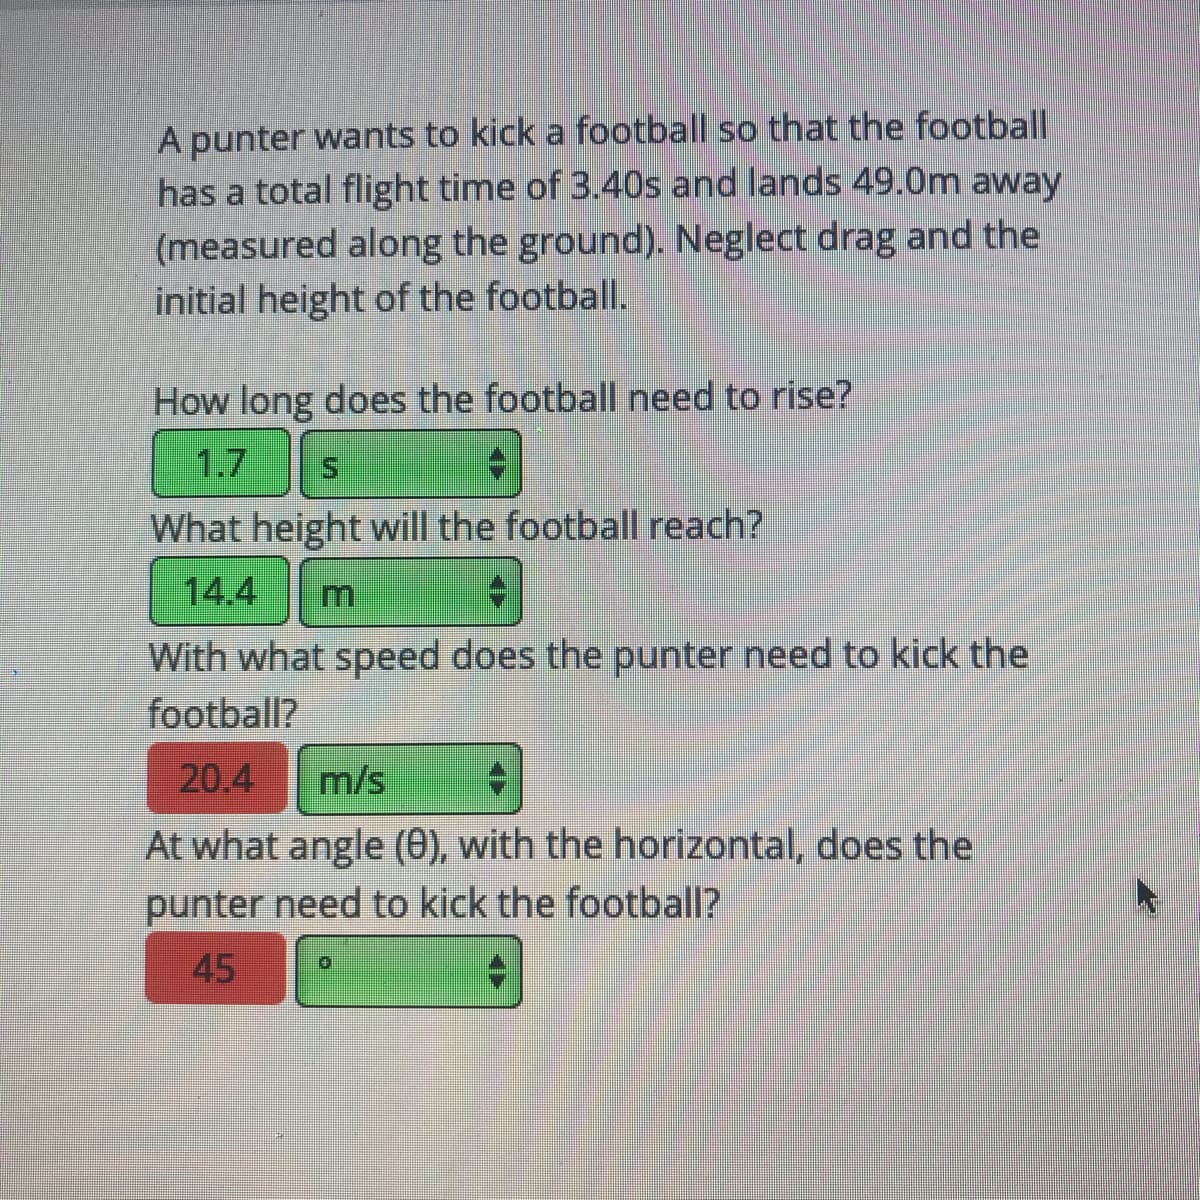 A punter wants to kick a football so that the football
has a total flight time of 3.40s and lands 49.0m away
(measured along the ground). Neglect drag and the
initial height of the football.
How long does the football need to rise?
1.7
What height will the football reach?
14.4
With what speed does the punter need to kick the
football?
20,4
m/s
At what angle (e), with the horizontal, does the
punter need to kick the football?
45
